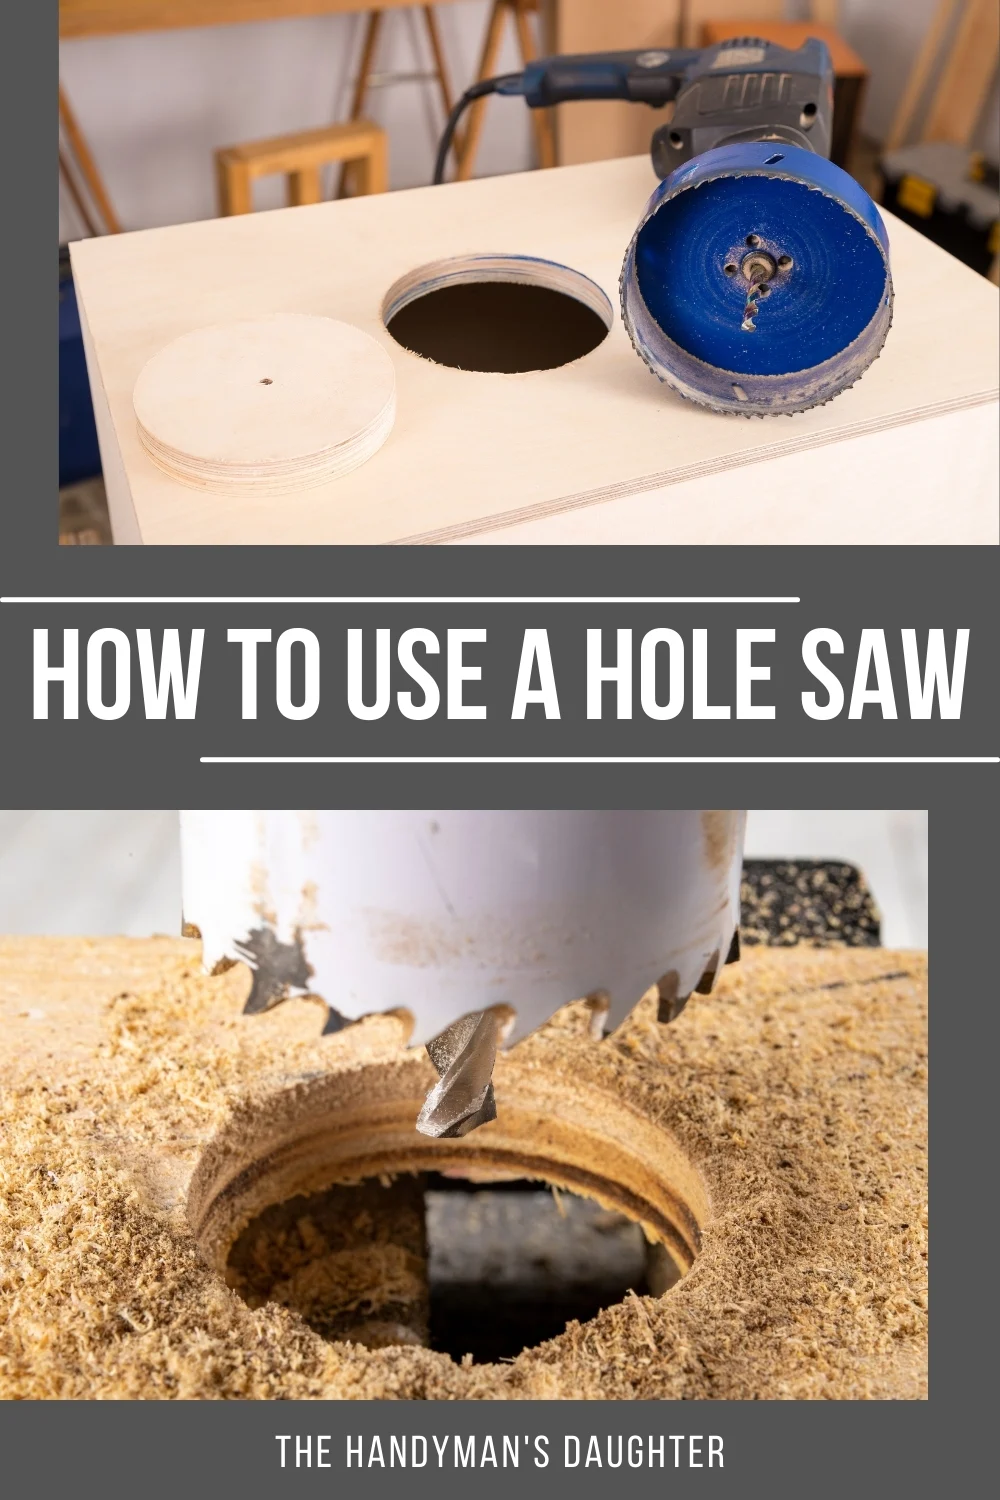 How to Use a Hole Saw Correctly - The Handyman's Daughter